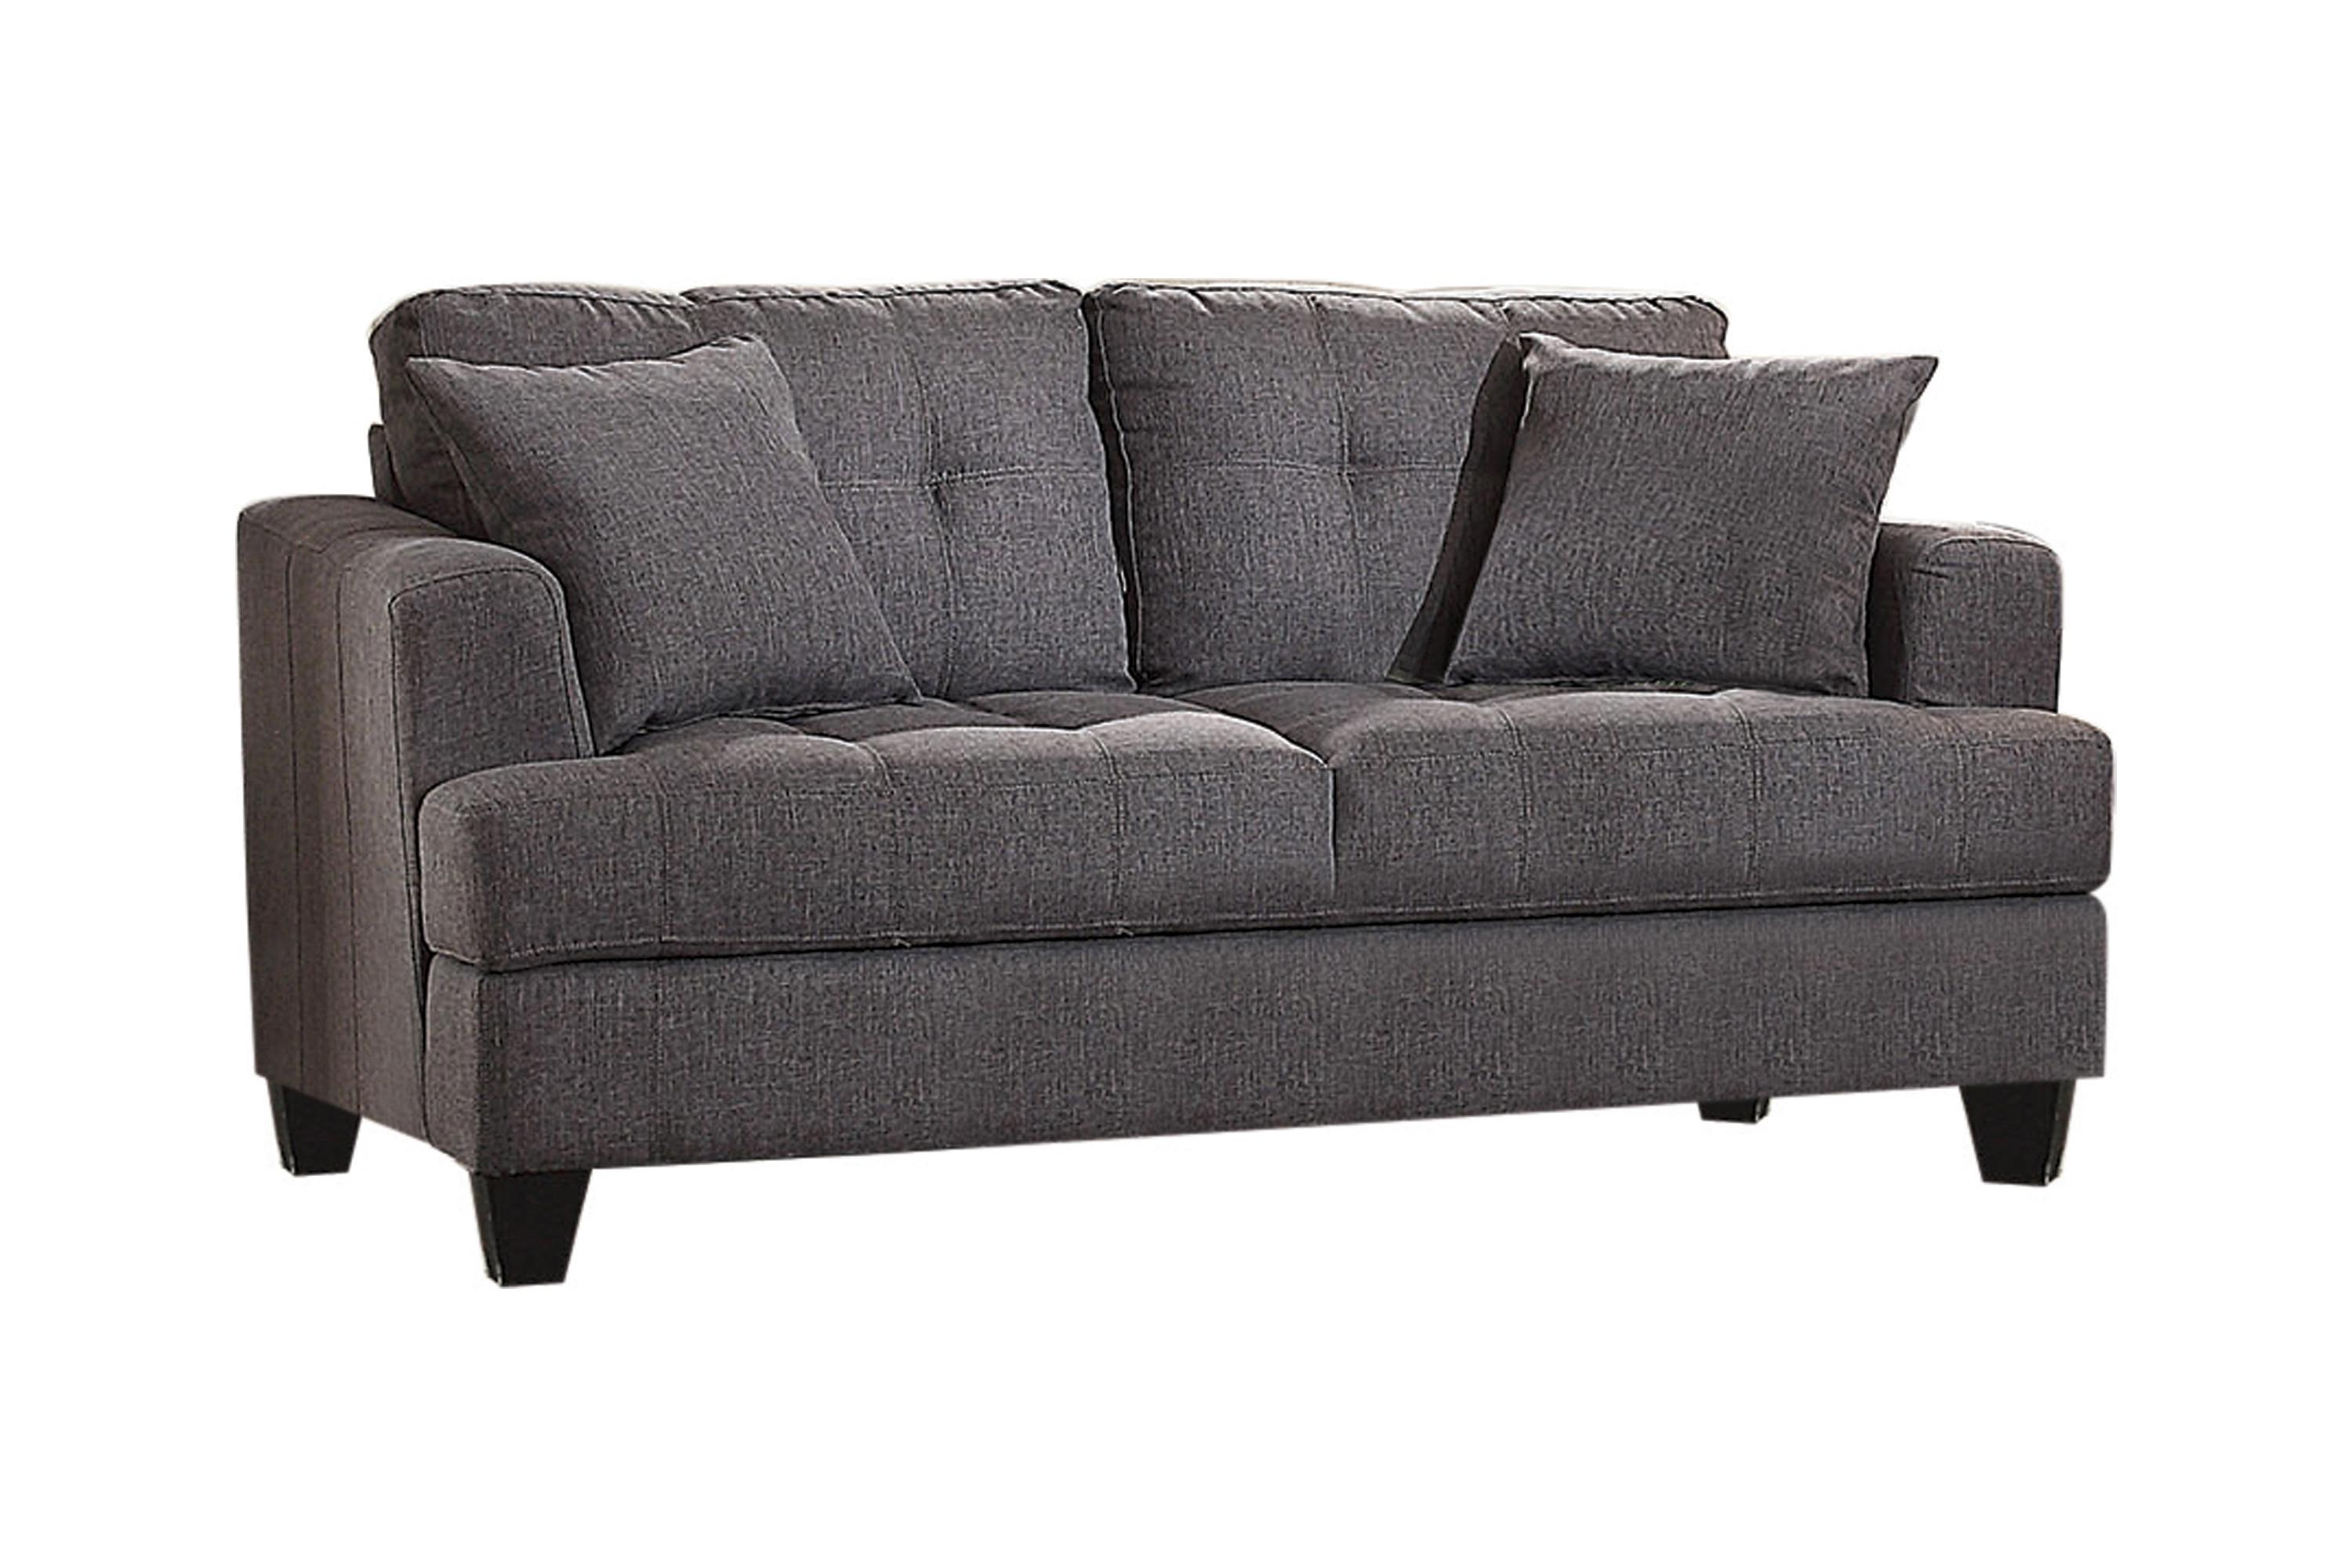 Transitional Loveseat 505176 Samuel 505176 in Charcoal 